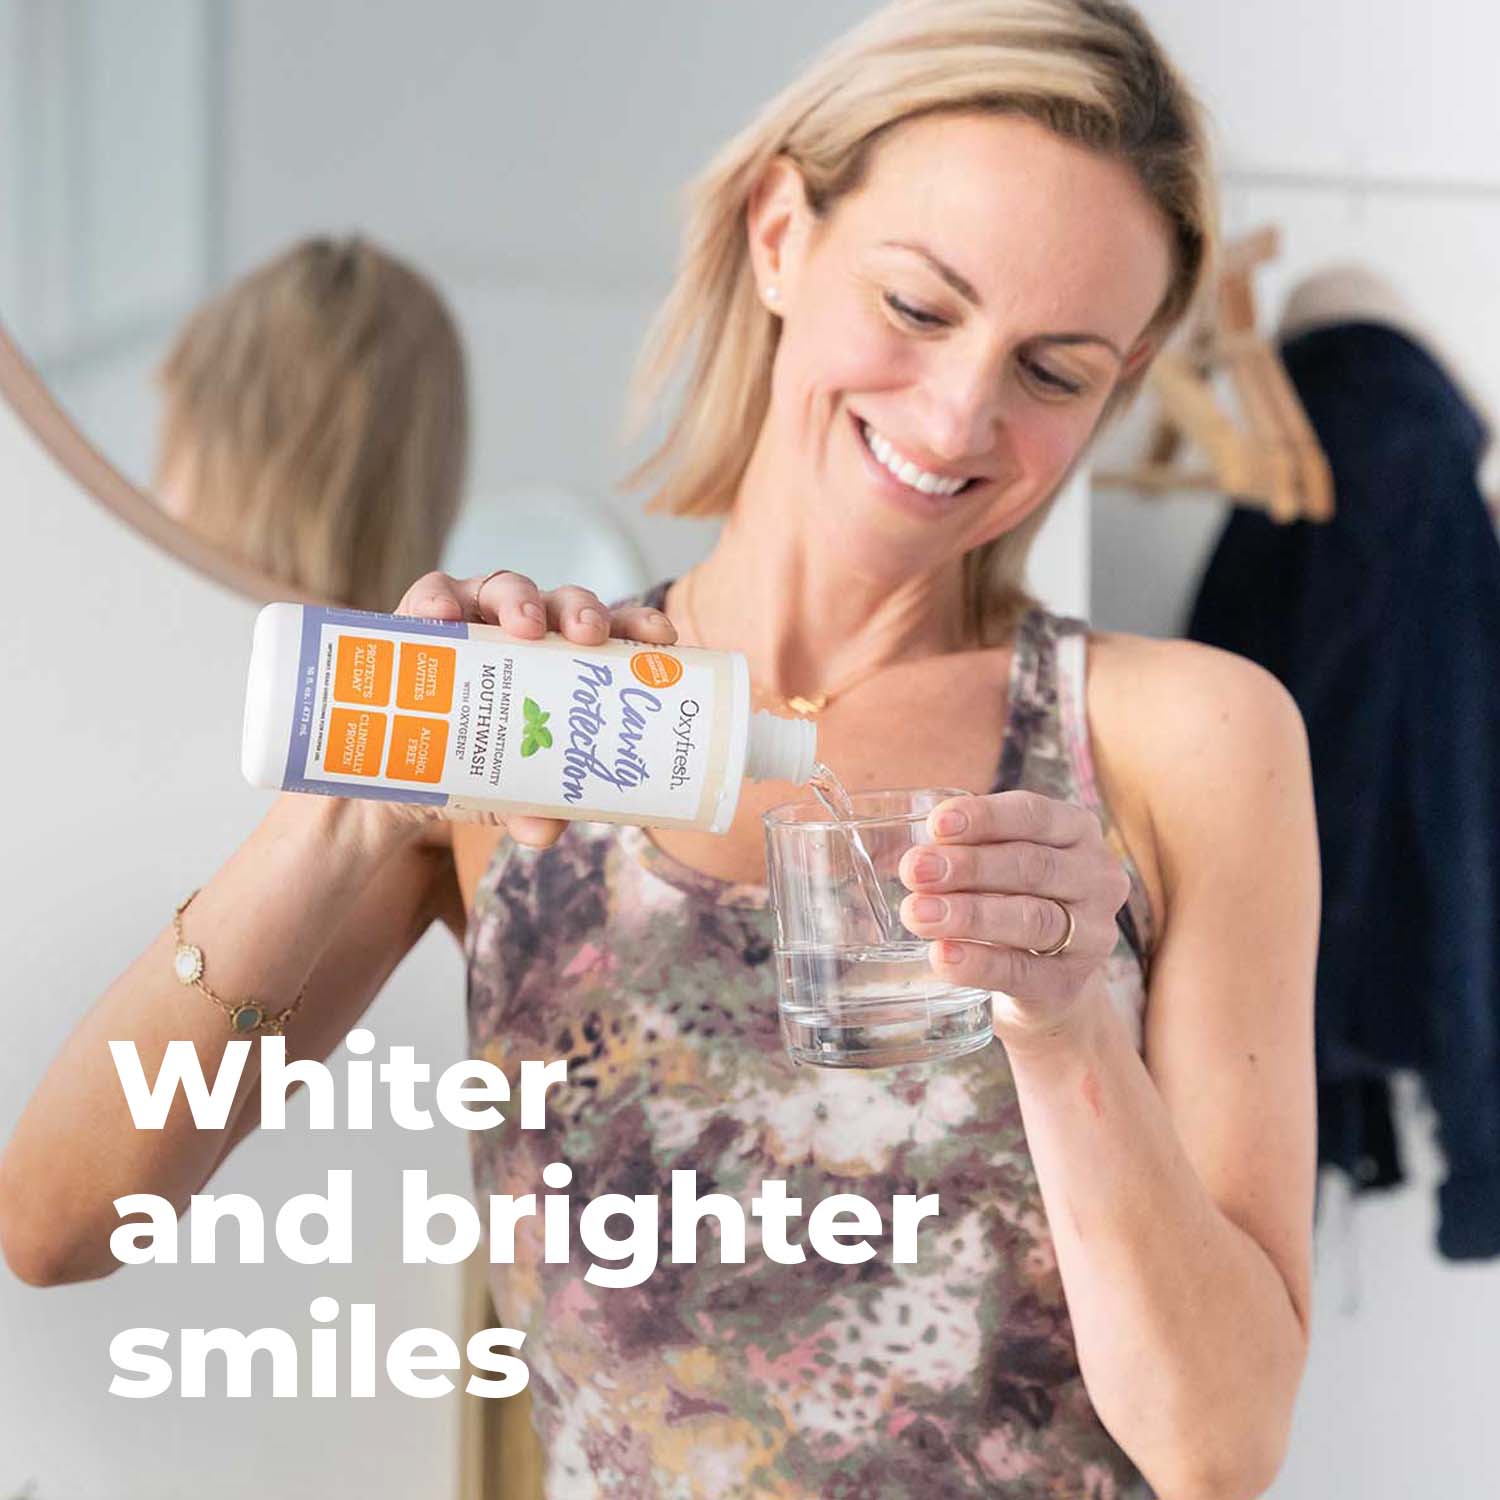 oxyfresh-cavity-protection-fluoride-mouthwash-for-whiter-and-brighter-smiles